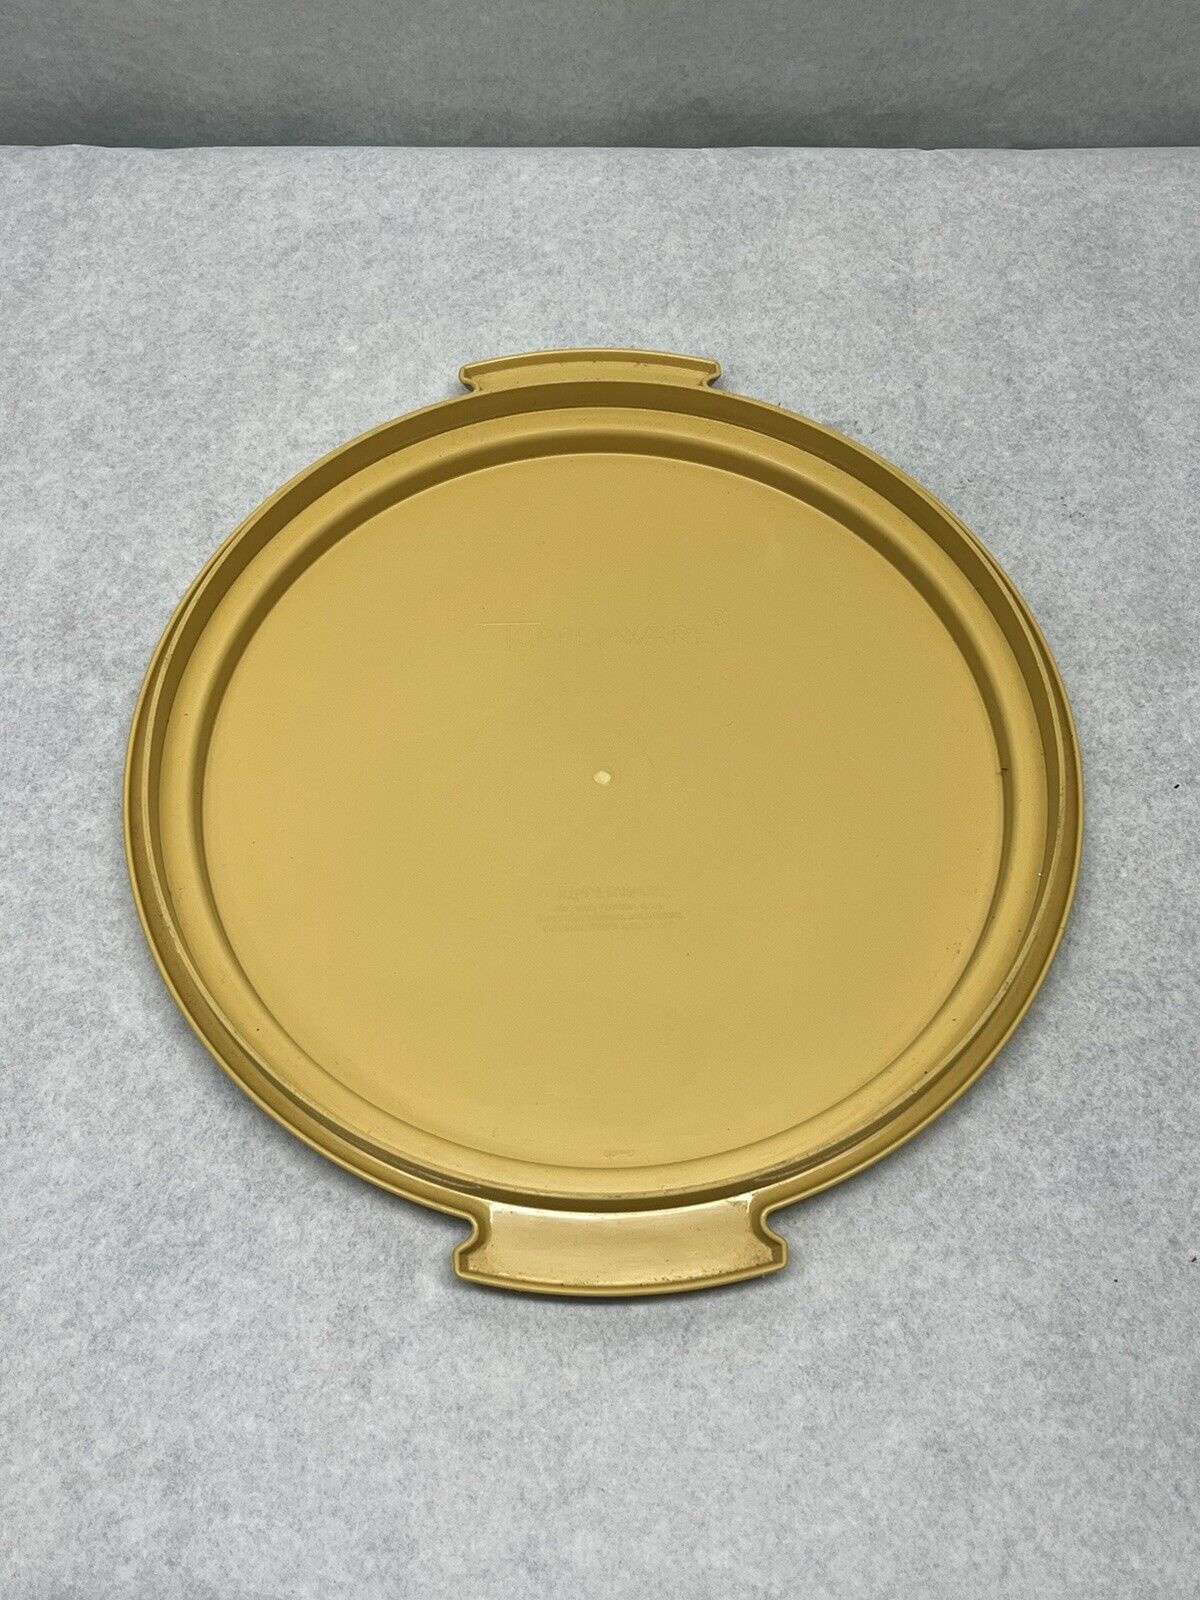 Vintage Tupperware Harvest Gold Cake Keeper Bottom Tray Only 684-5 - Pre Owned